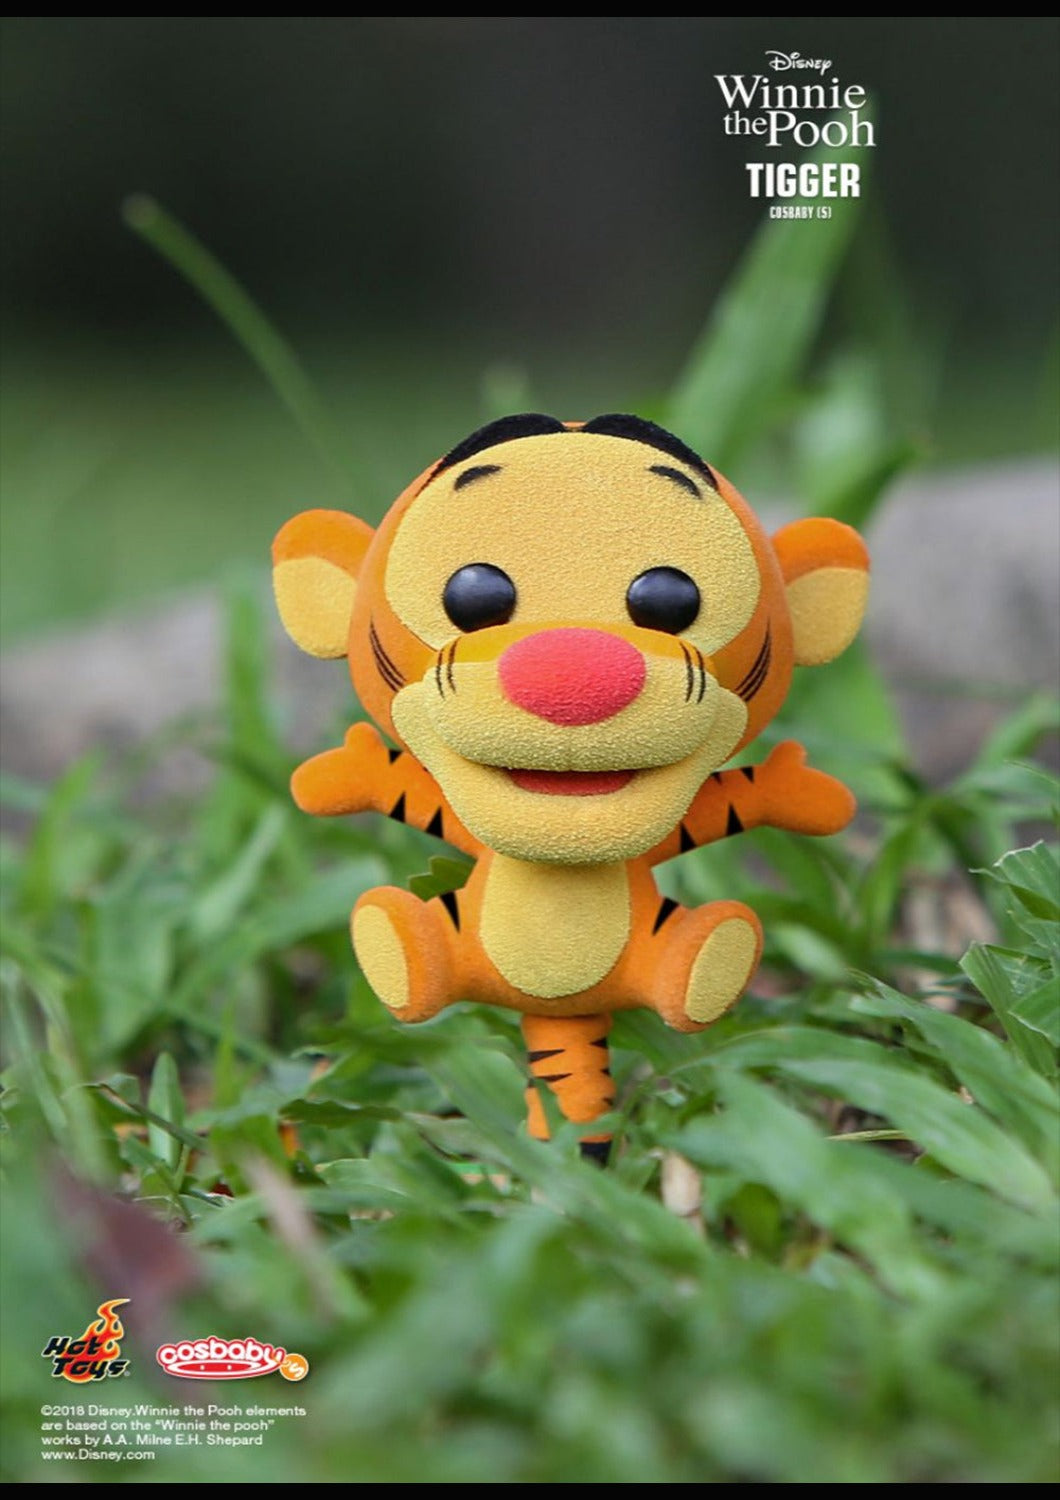 COSBABY WINNIE THE POOH: TIGGER - COSB521 - Anotoys Collectibles